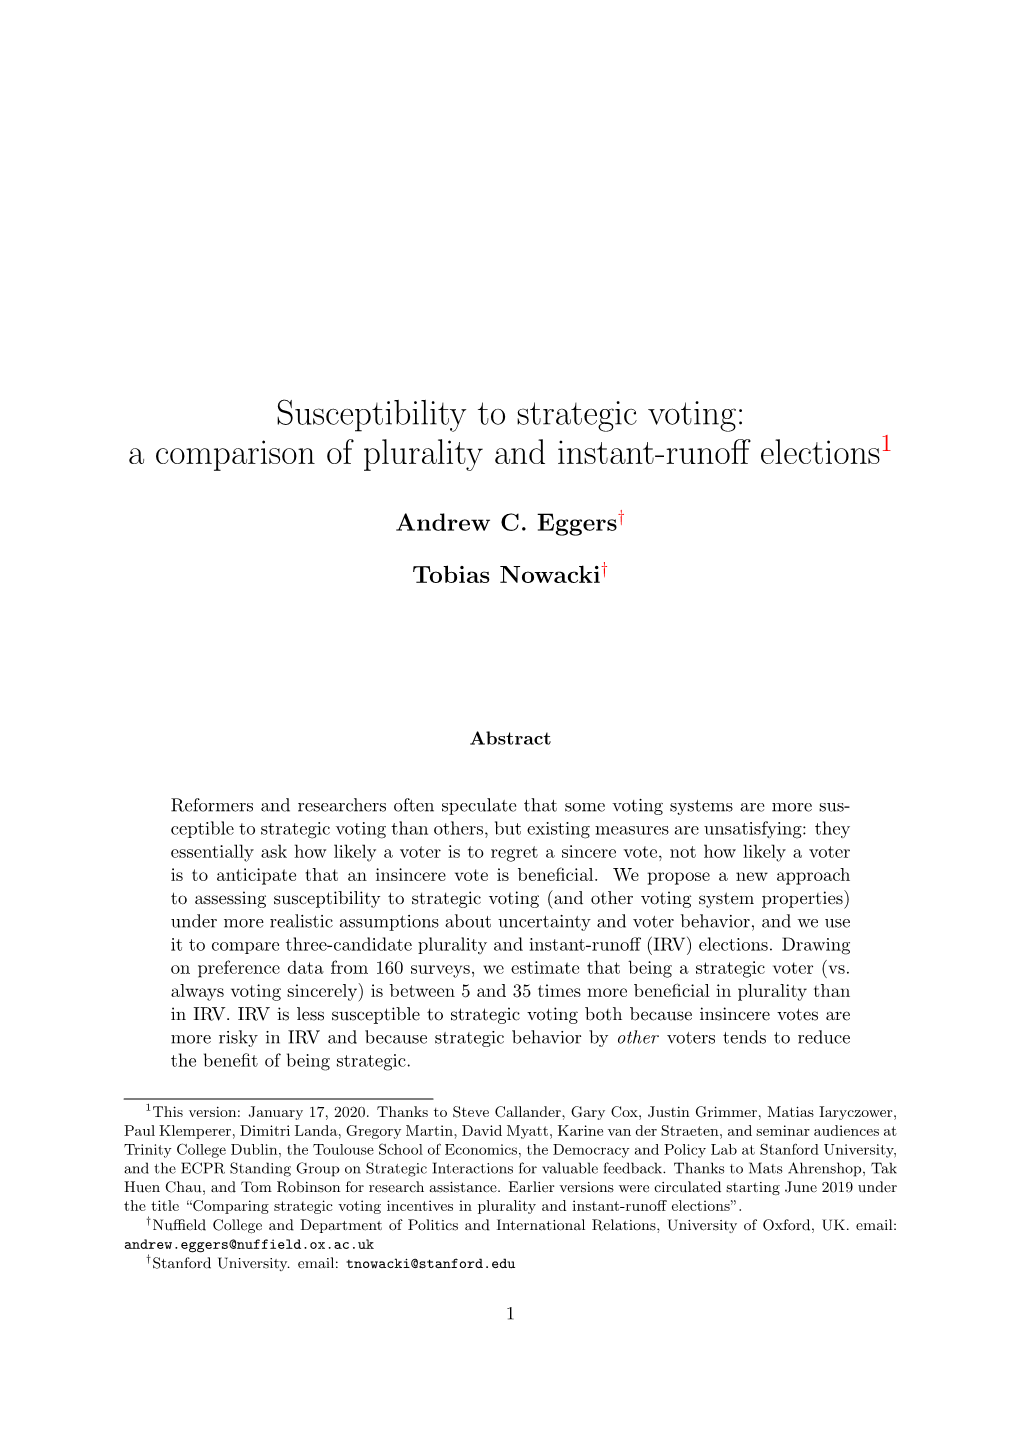 Susceptibility to Strategic Voting: a Comparison of Plurality and Instant-Runoﬀ Elections1